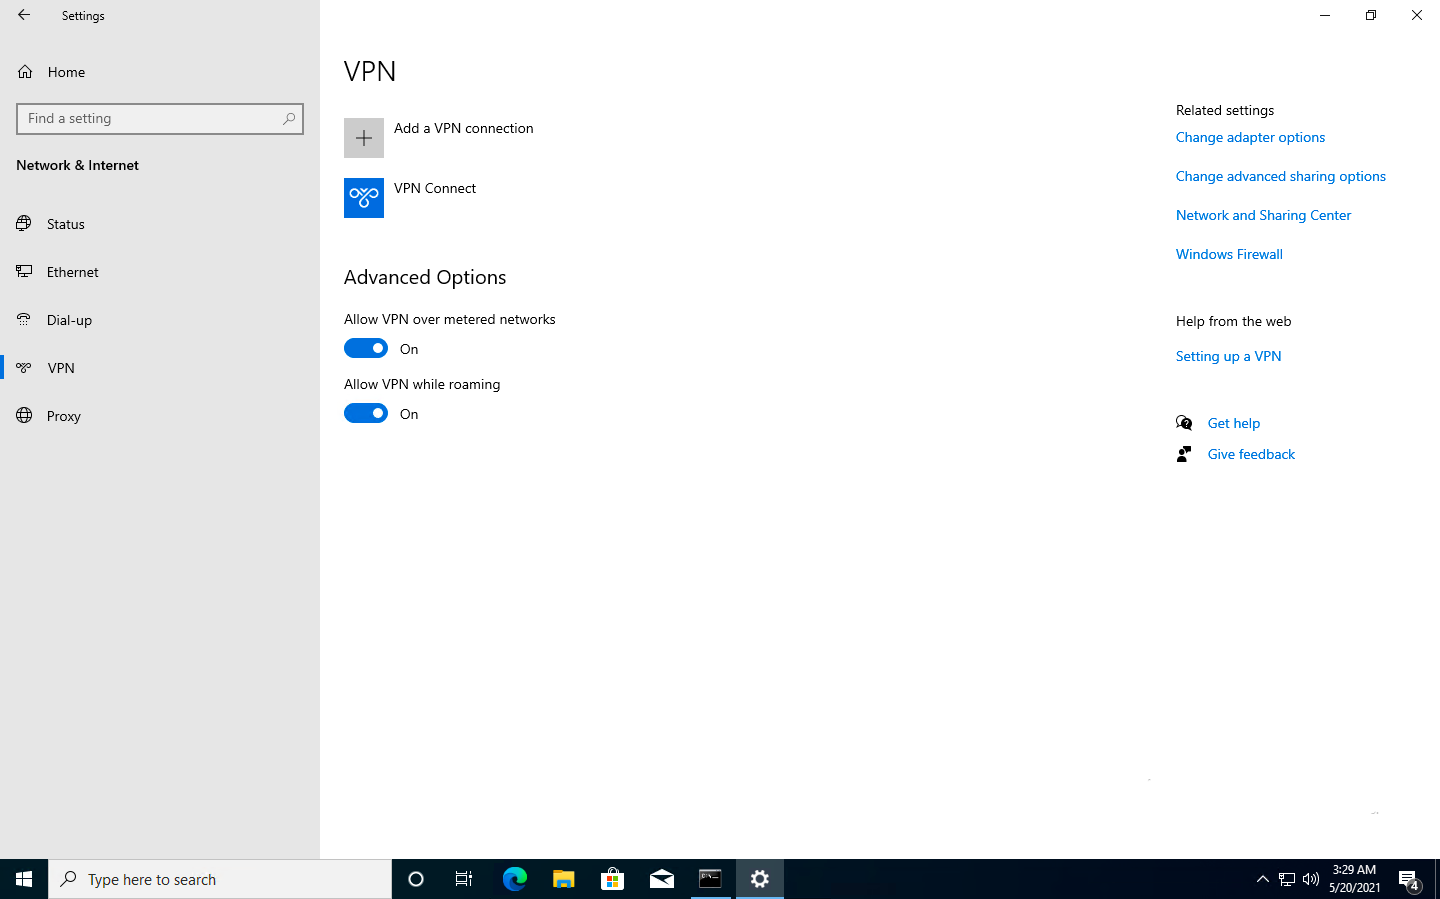 Configured VPN connection on the device.